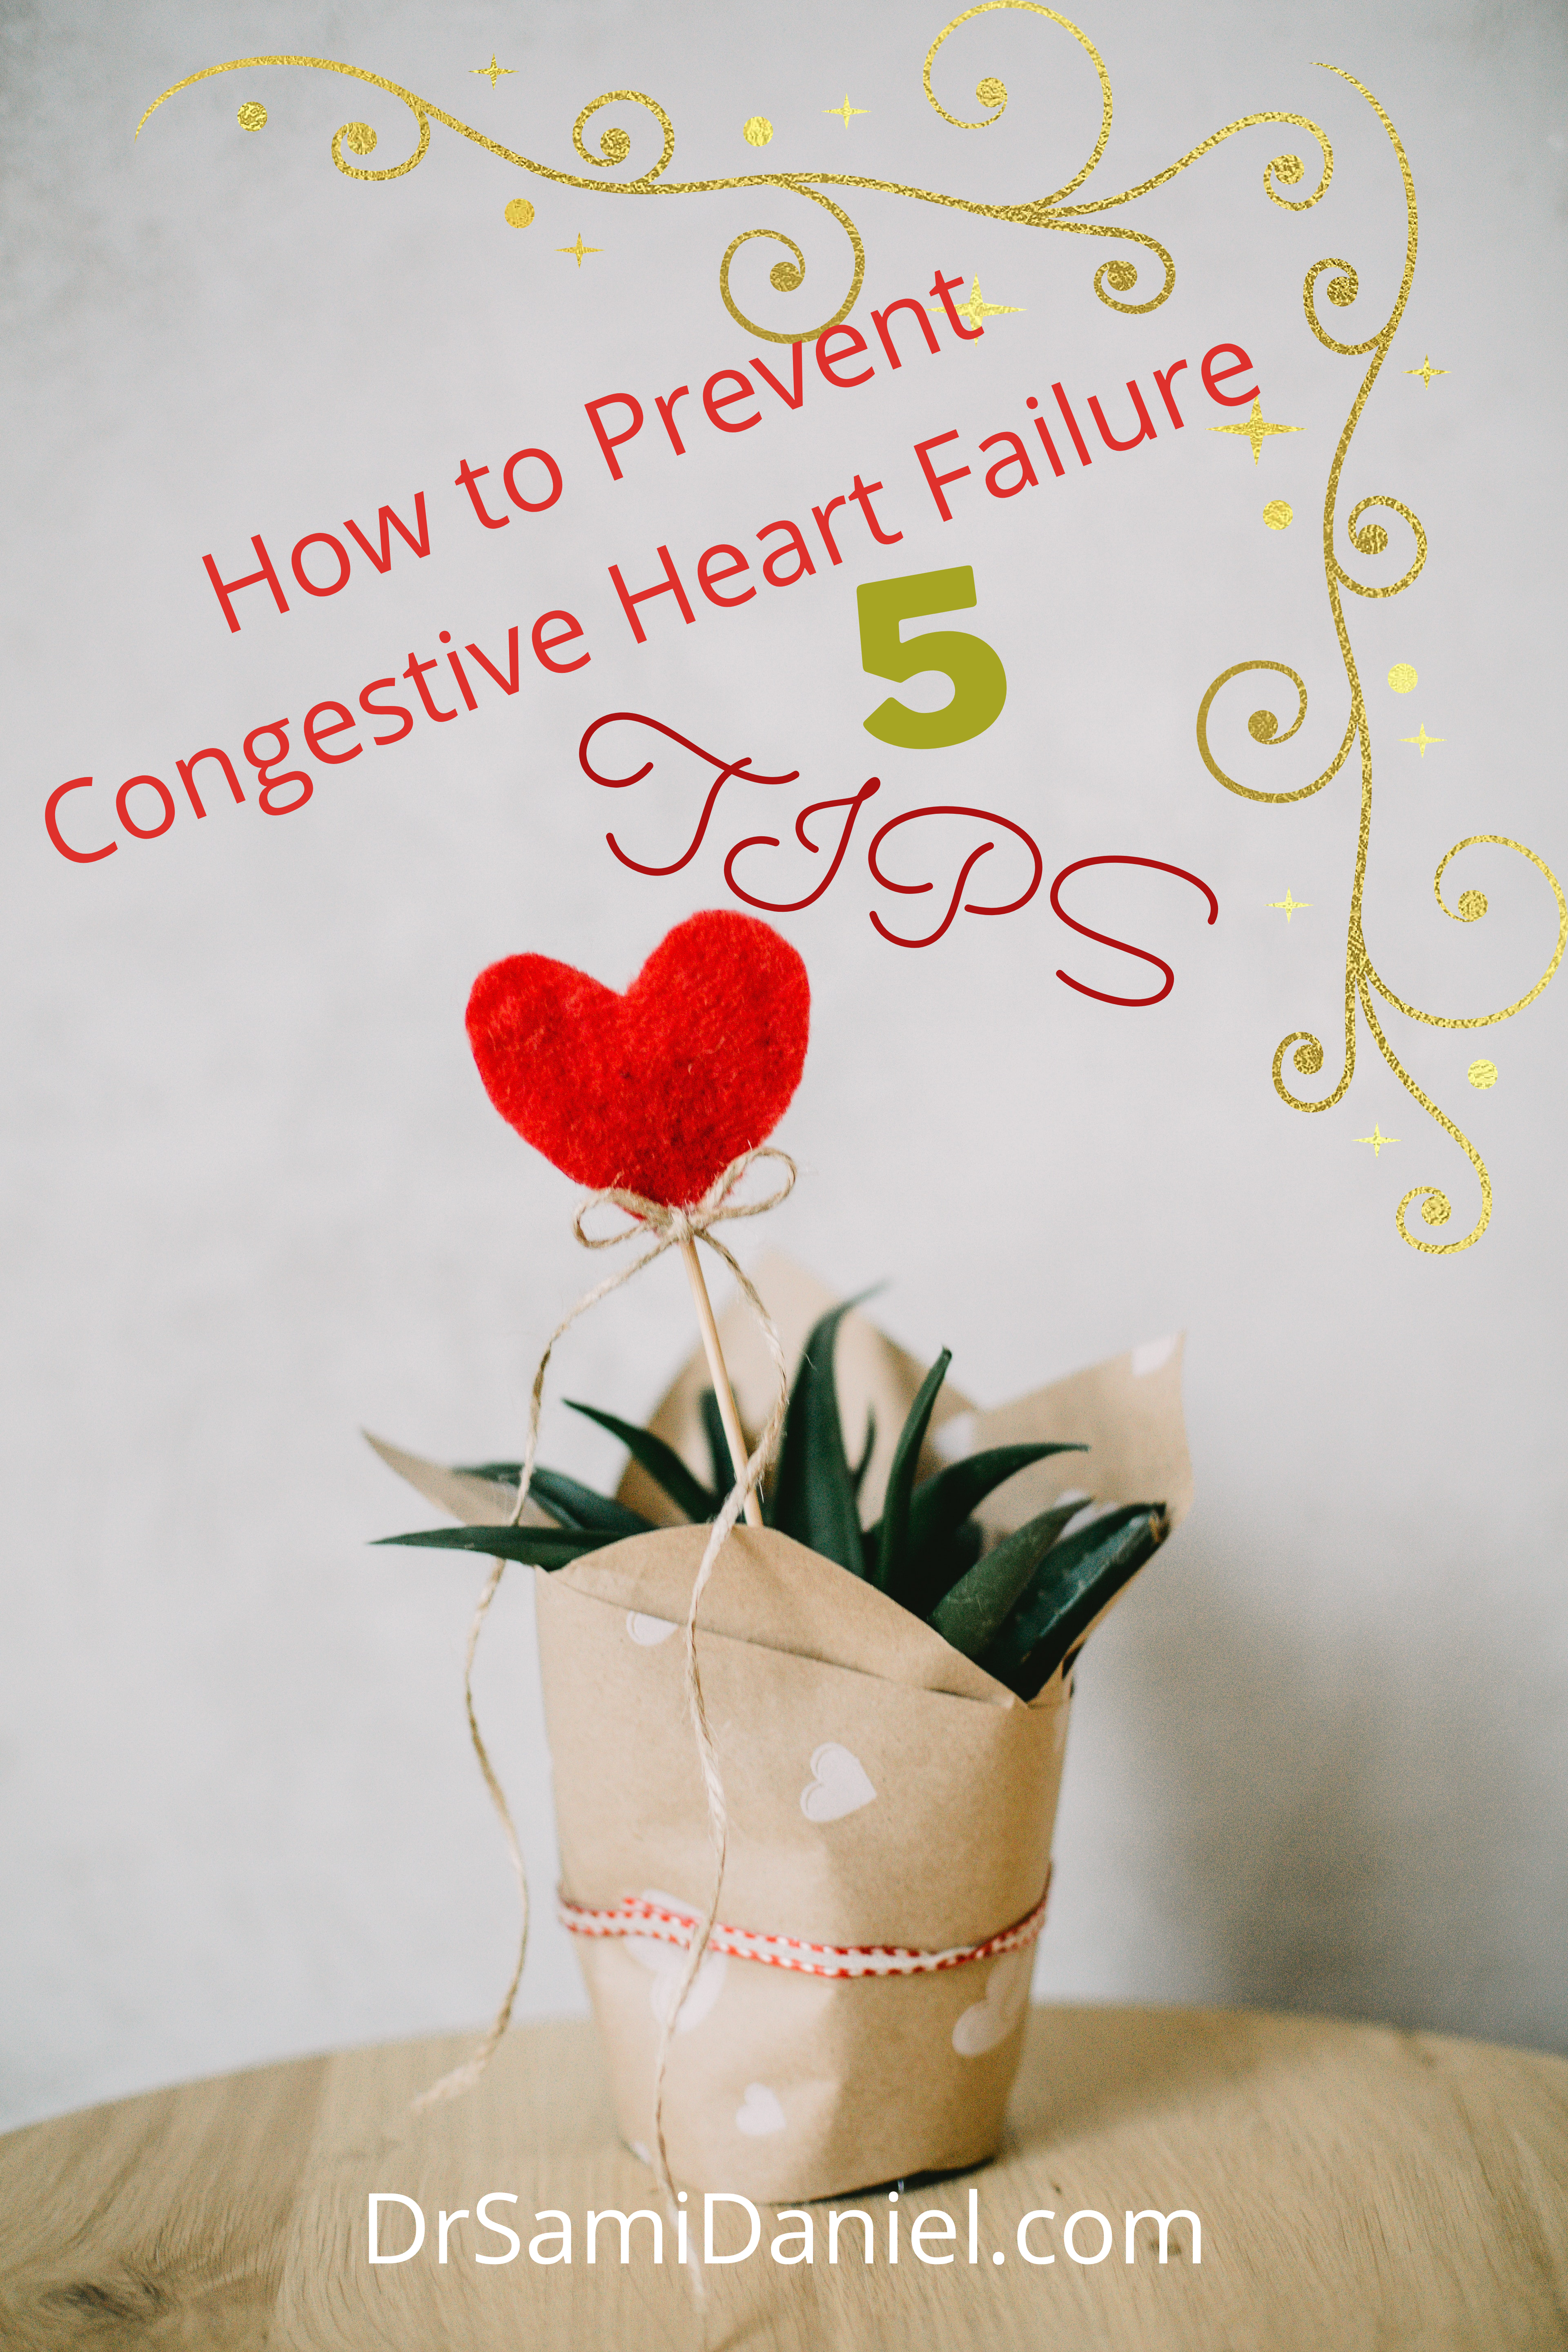 How to prevent congestive heart failure